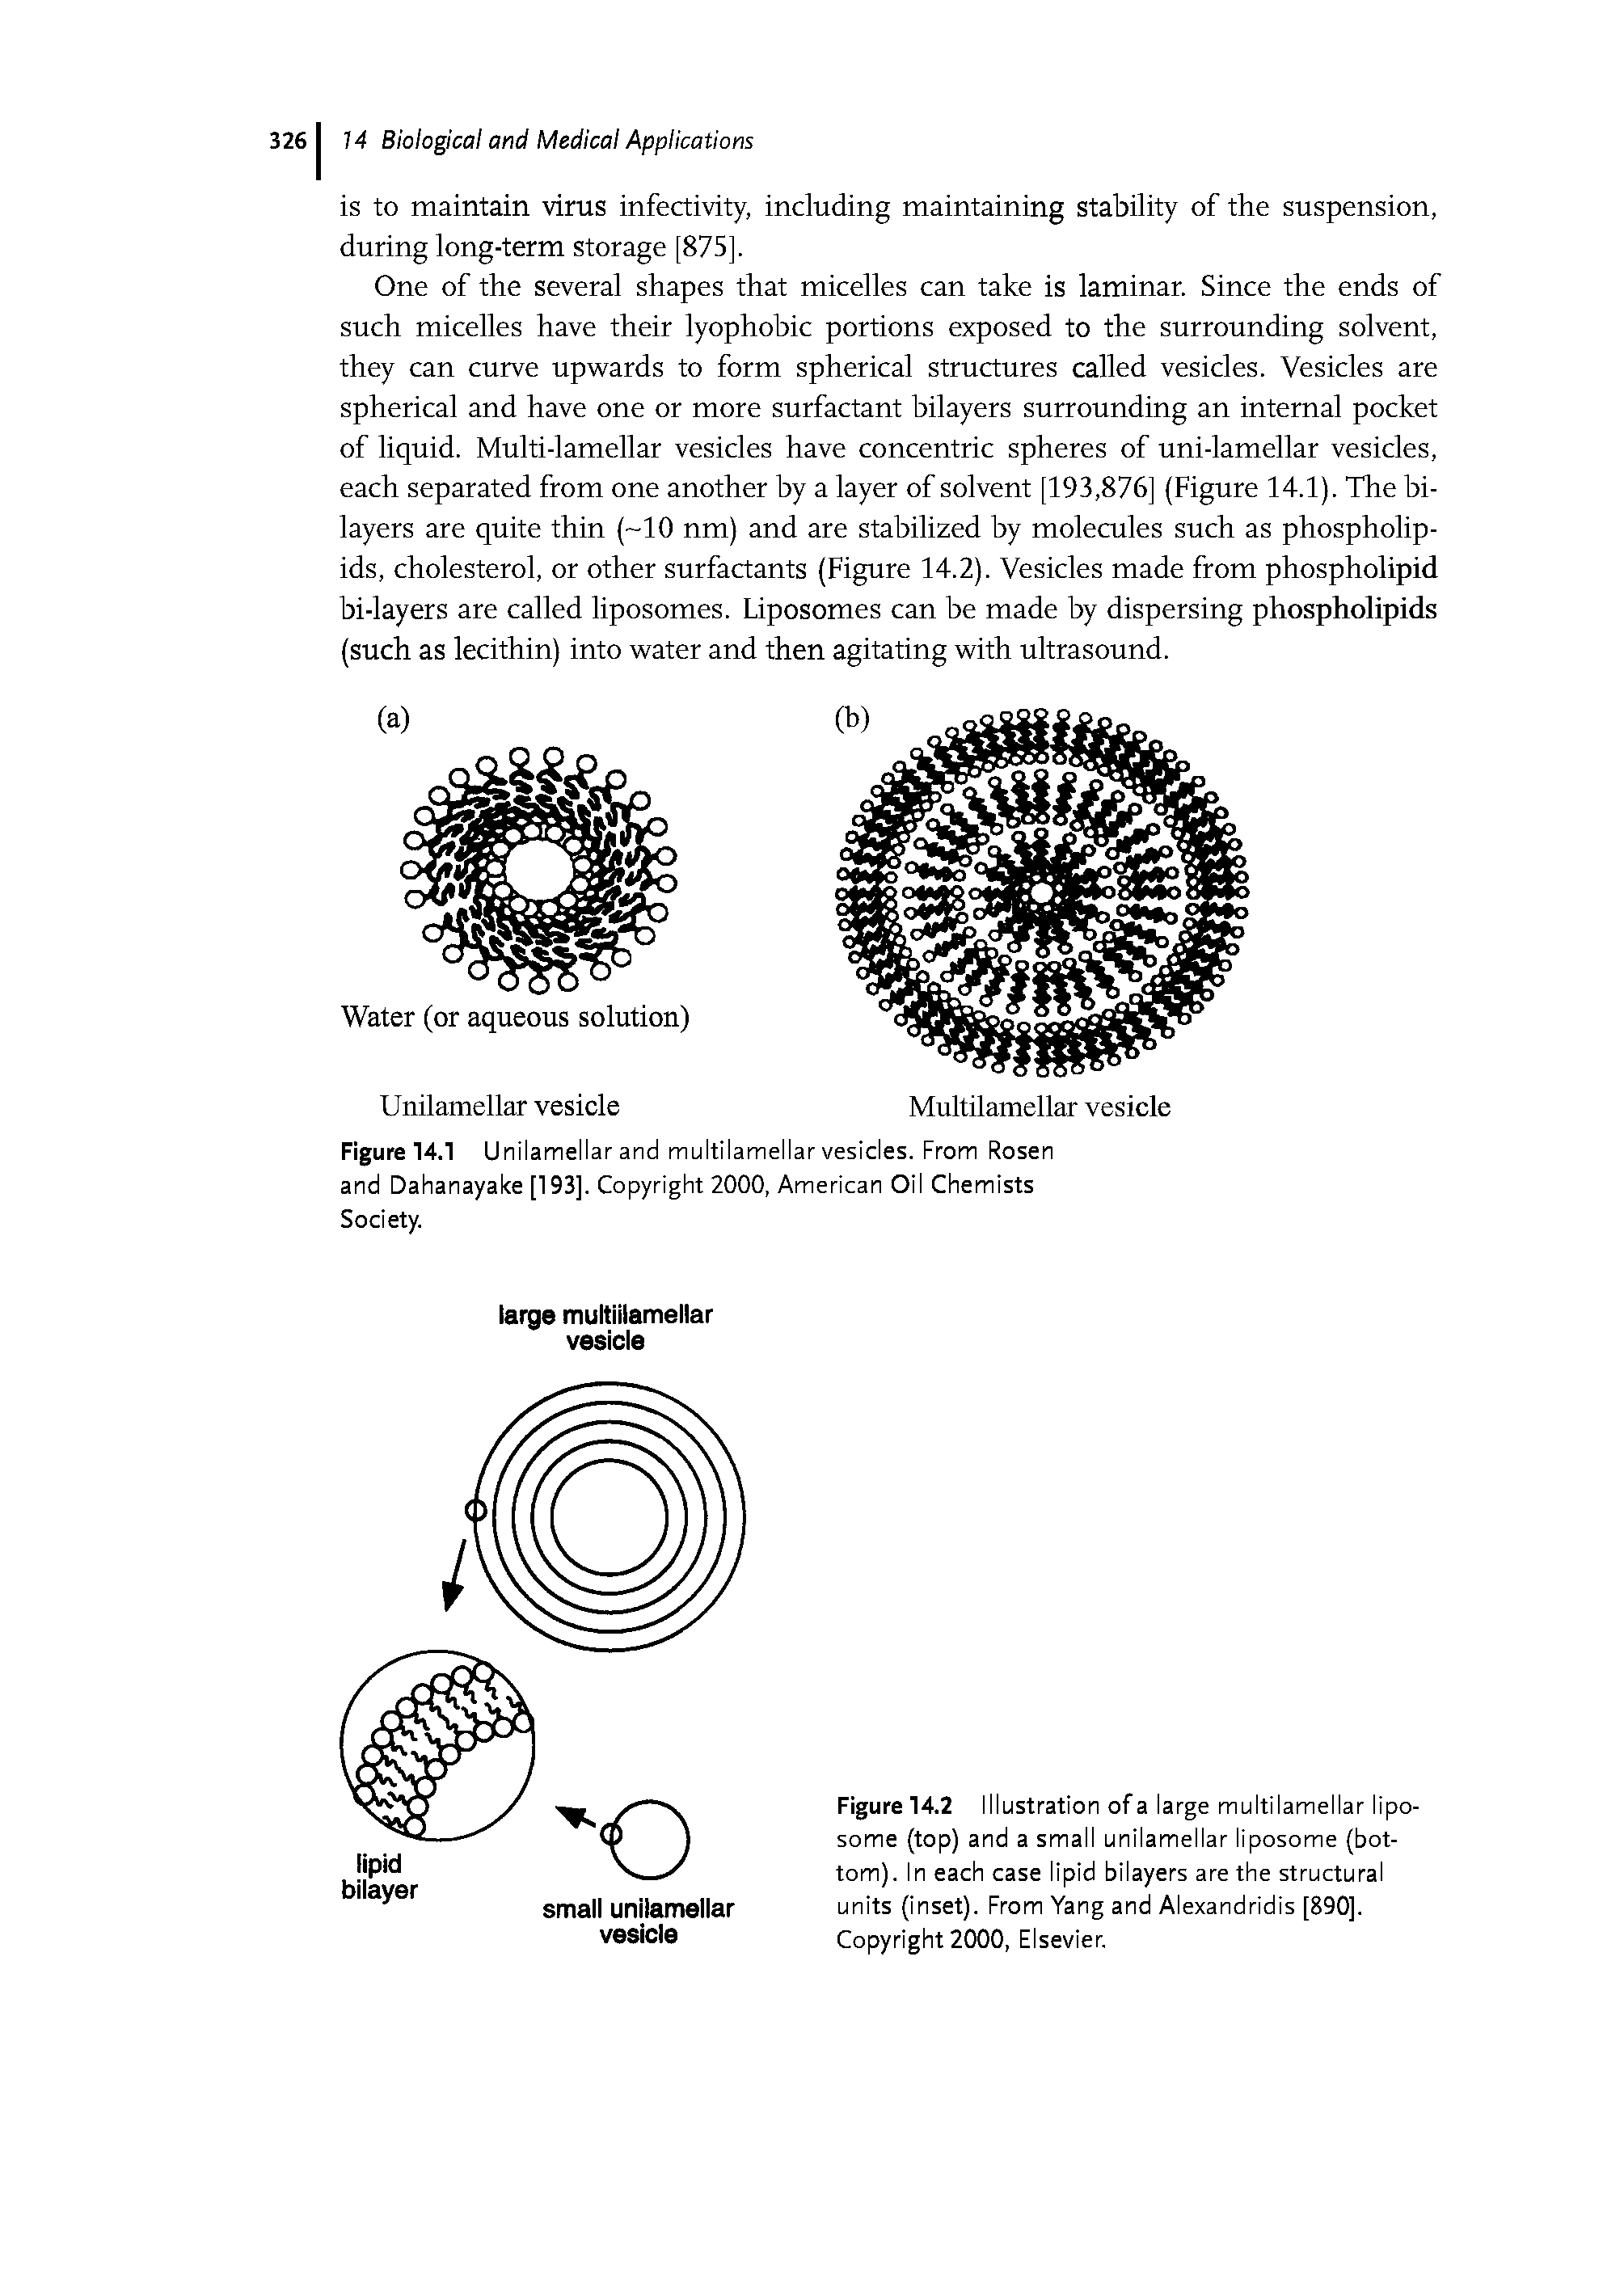 Figure 14.2 Illustration of a large multilamellar liposome (top) and a small unilamellar liposome (bottom). In each case lipid bilayers are the structural units (inset). From Yang and Alexandridis [890]. Copyright 2000, Elsevier.